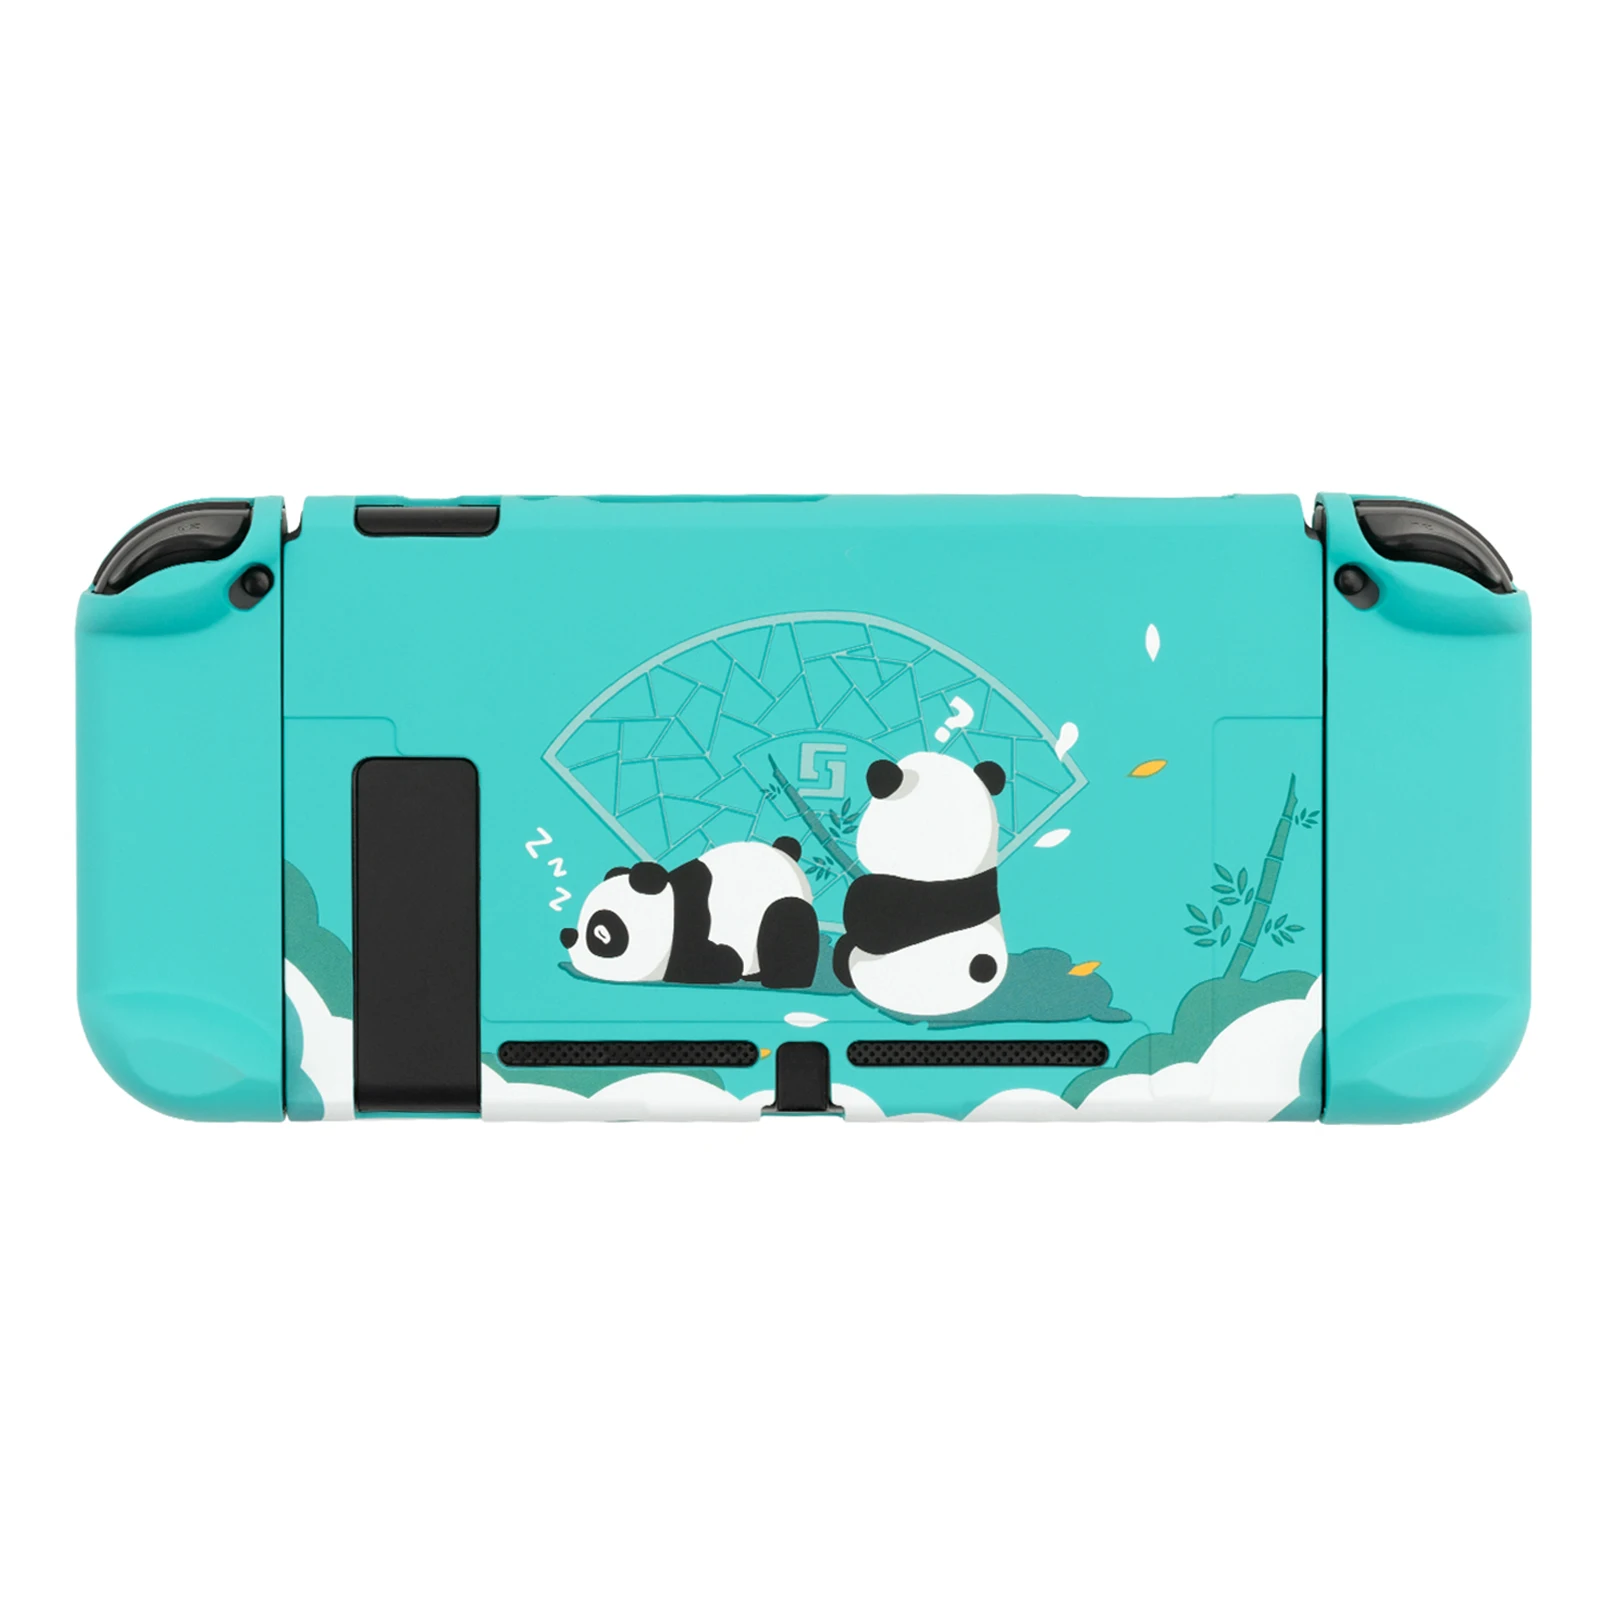 Geekshare Factory Price Cute Patterns Pc Hard Case For Nintendo Switch Console Protective Shell Buy Nintendo Switch Case Cover Nintendo Switch Game Card Cover Nintendo Switch Bag Slip Sleeve Case Cover Product On